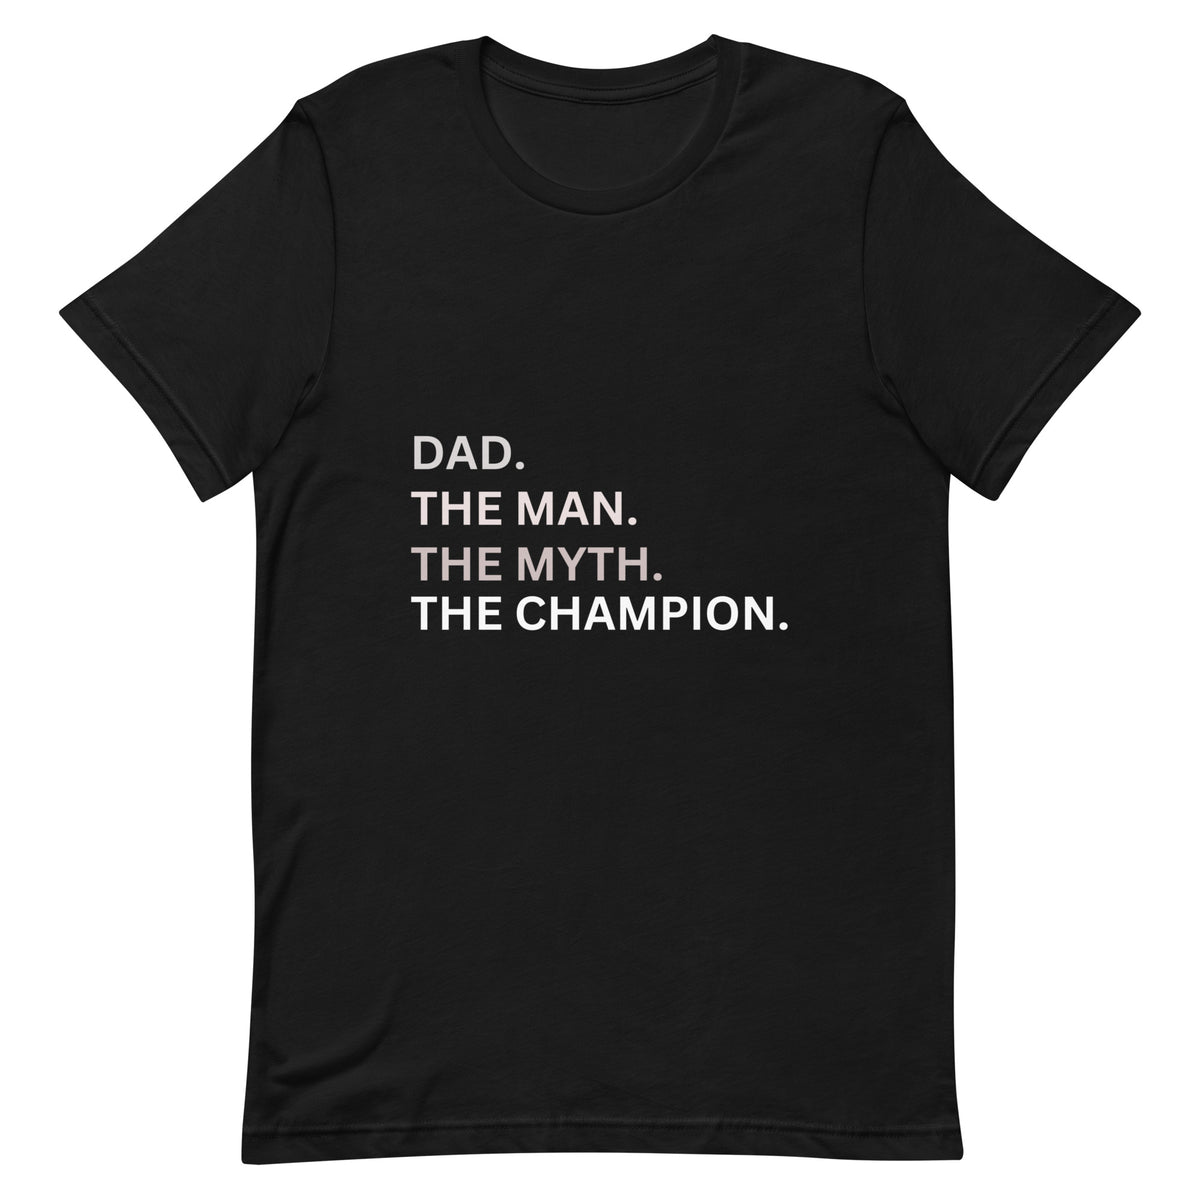 UNISEX T-SHIRT - DAD THE MAN, THE MYTH, AND THE CHAMPION